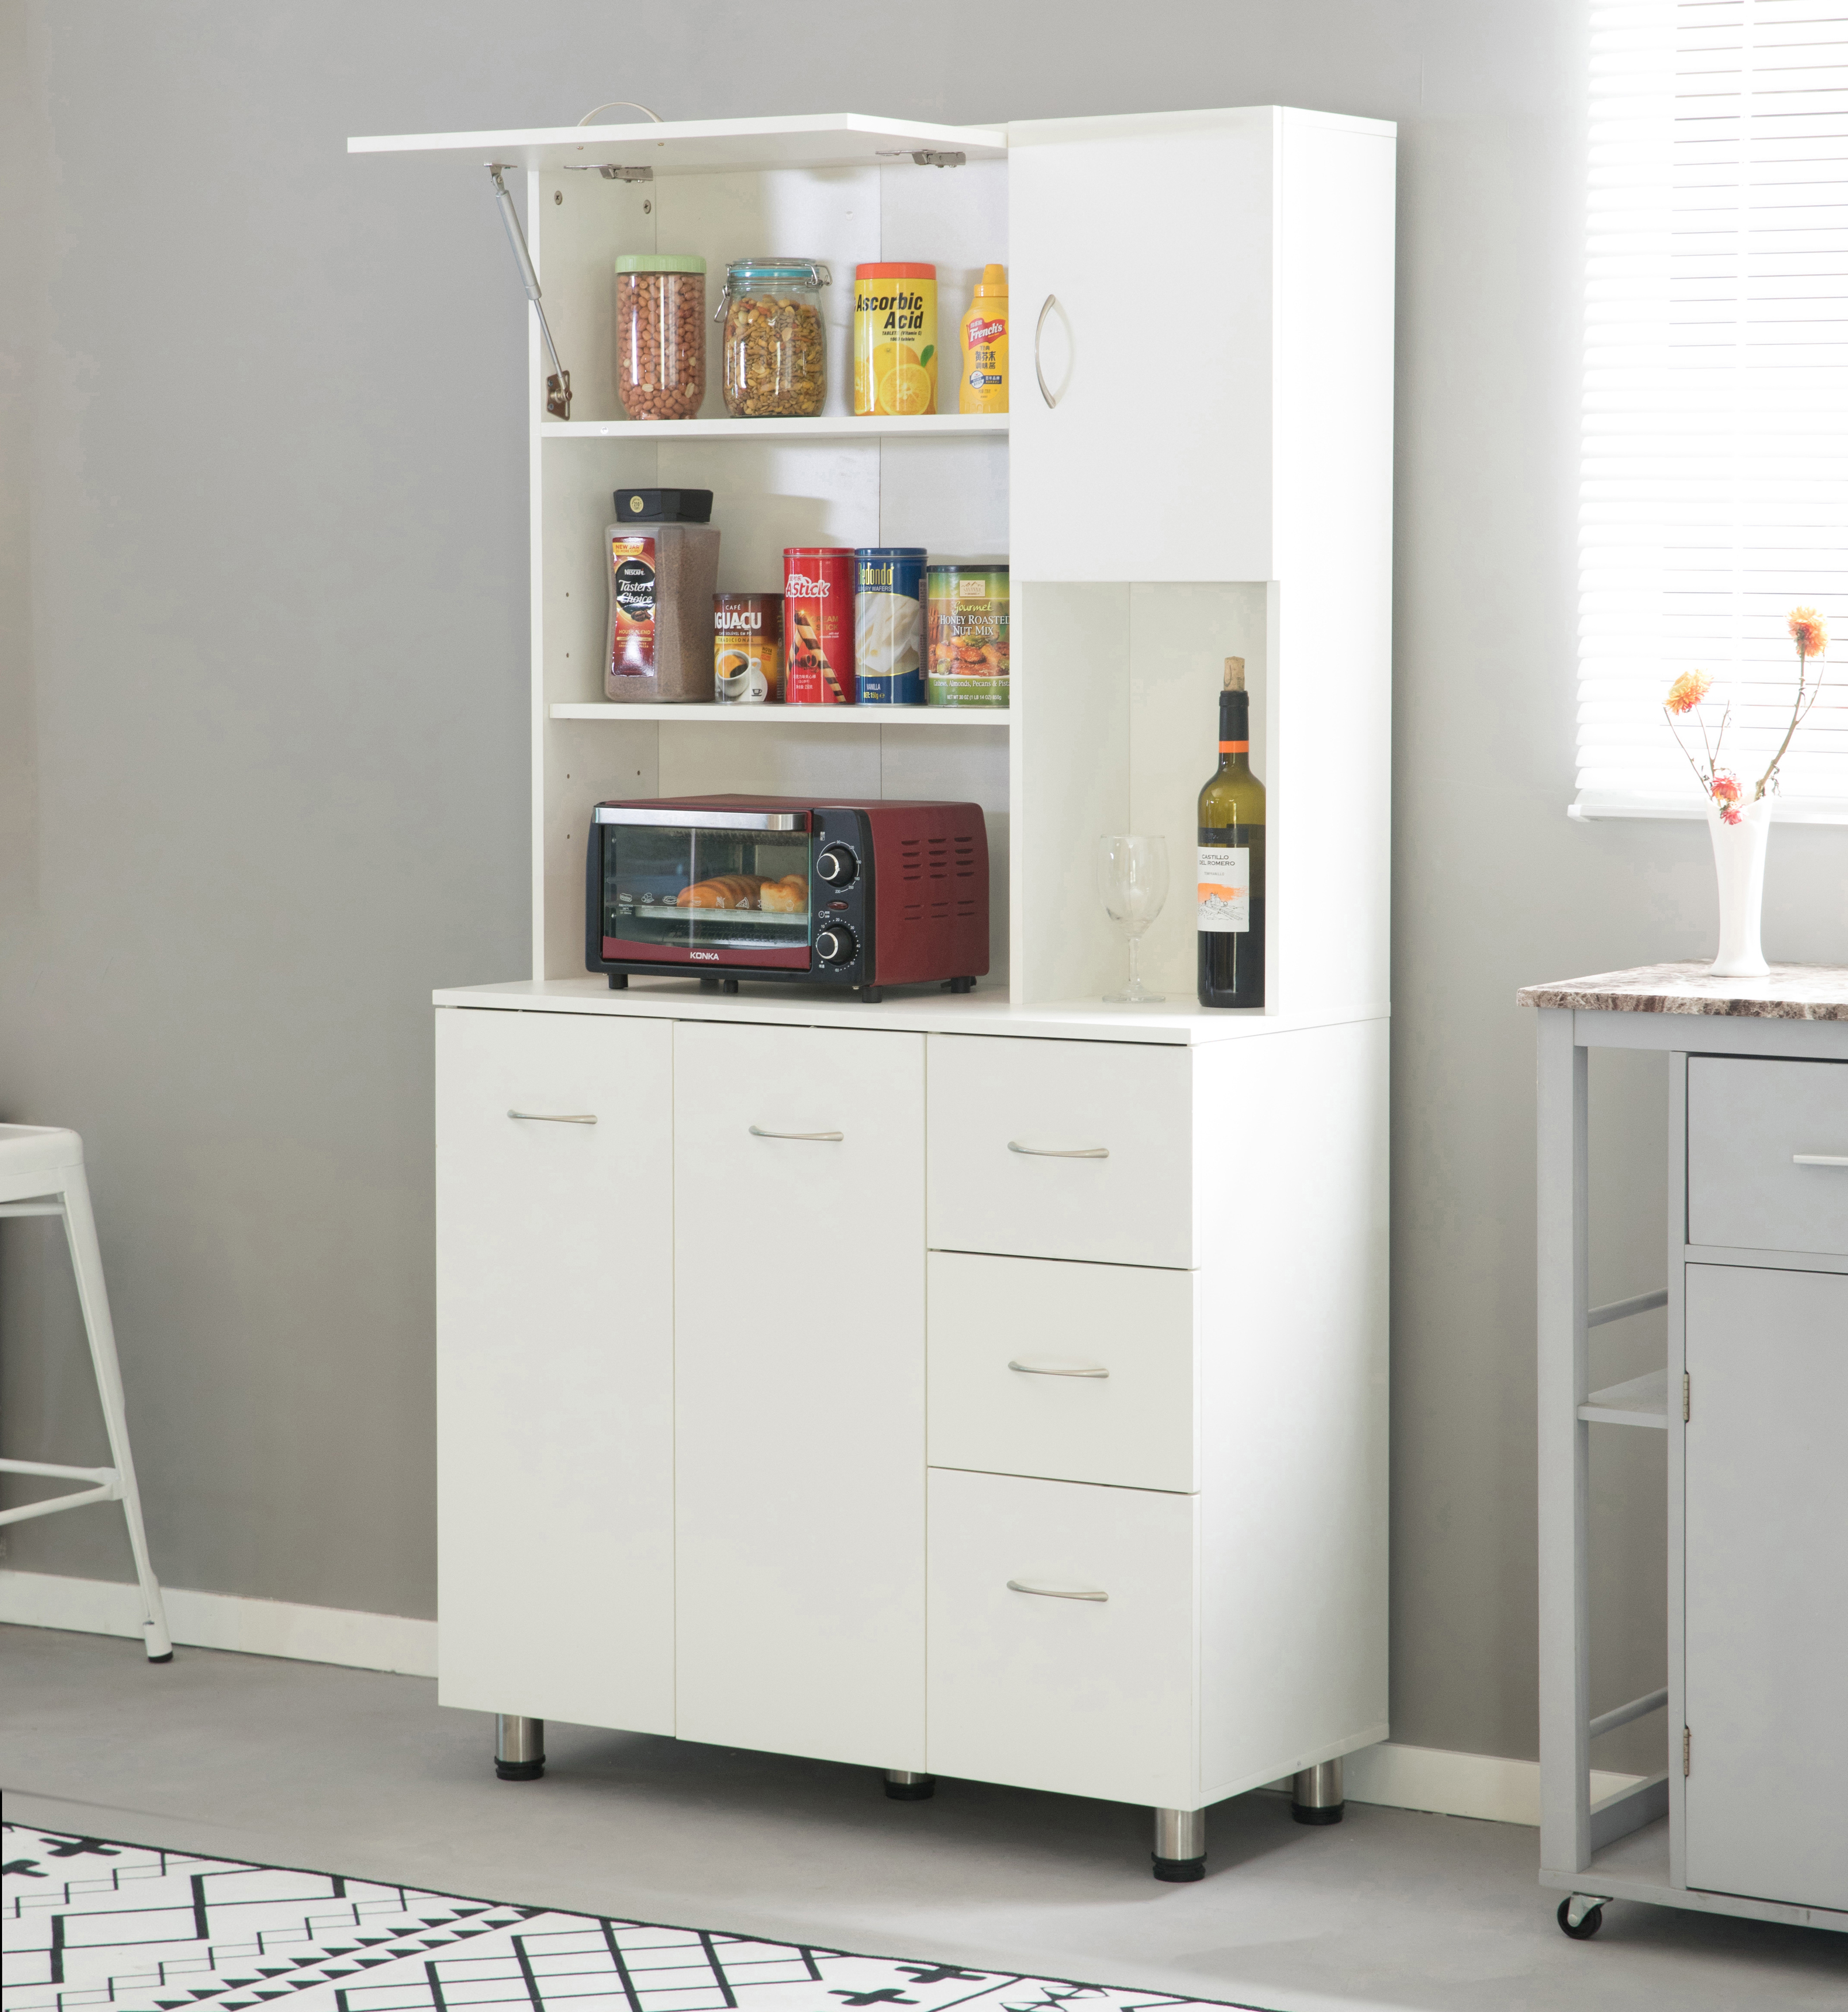  Kitchen Furniture Storage for Small Space